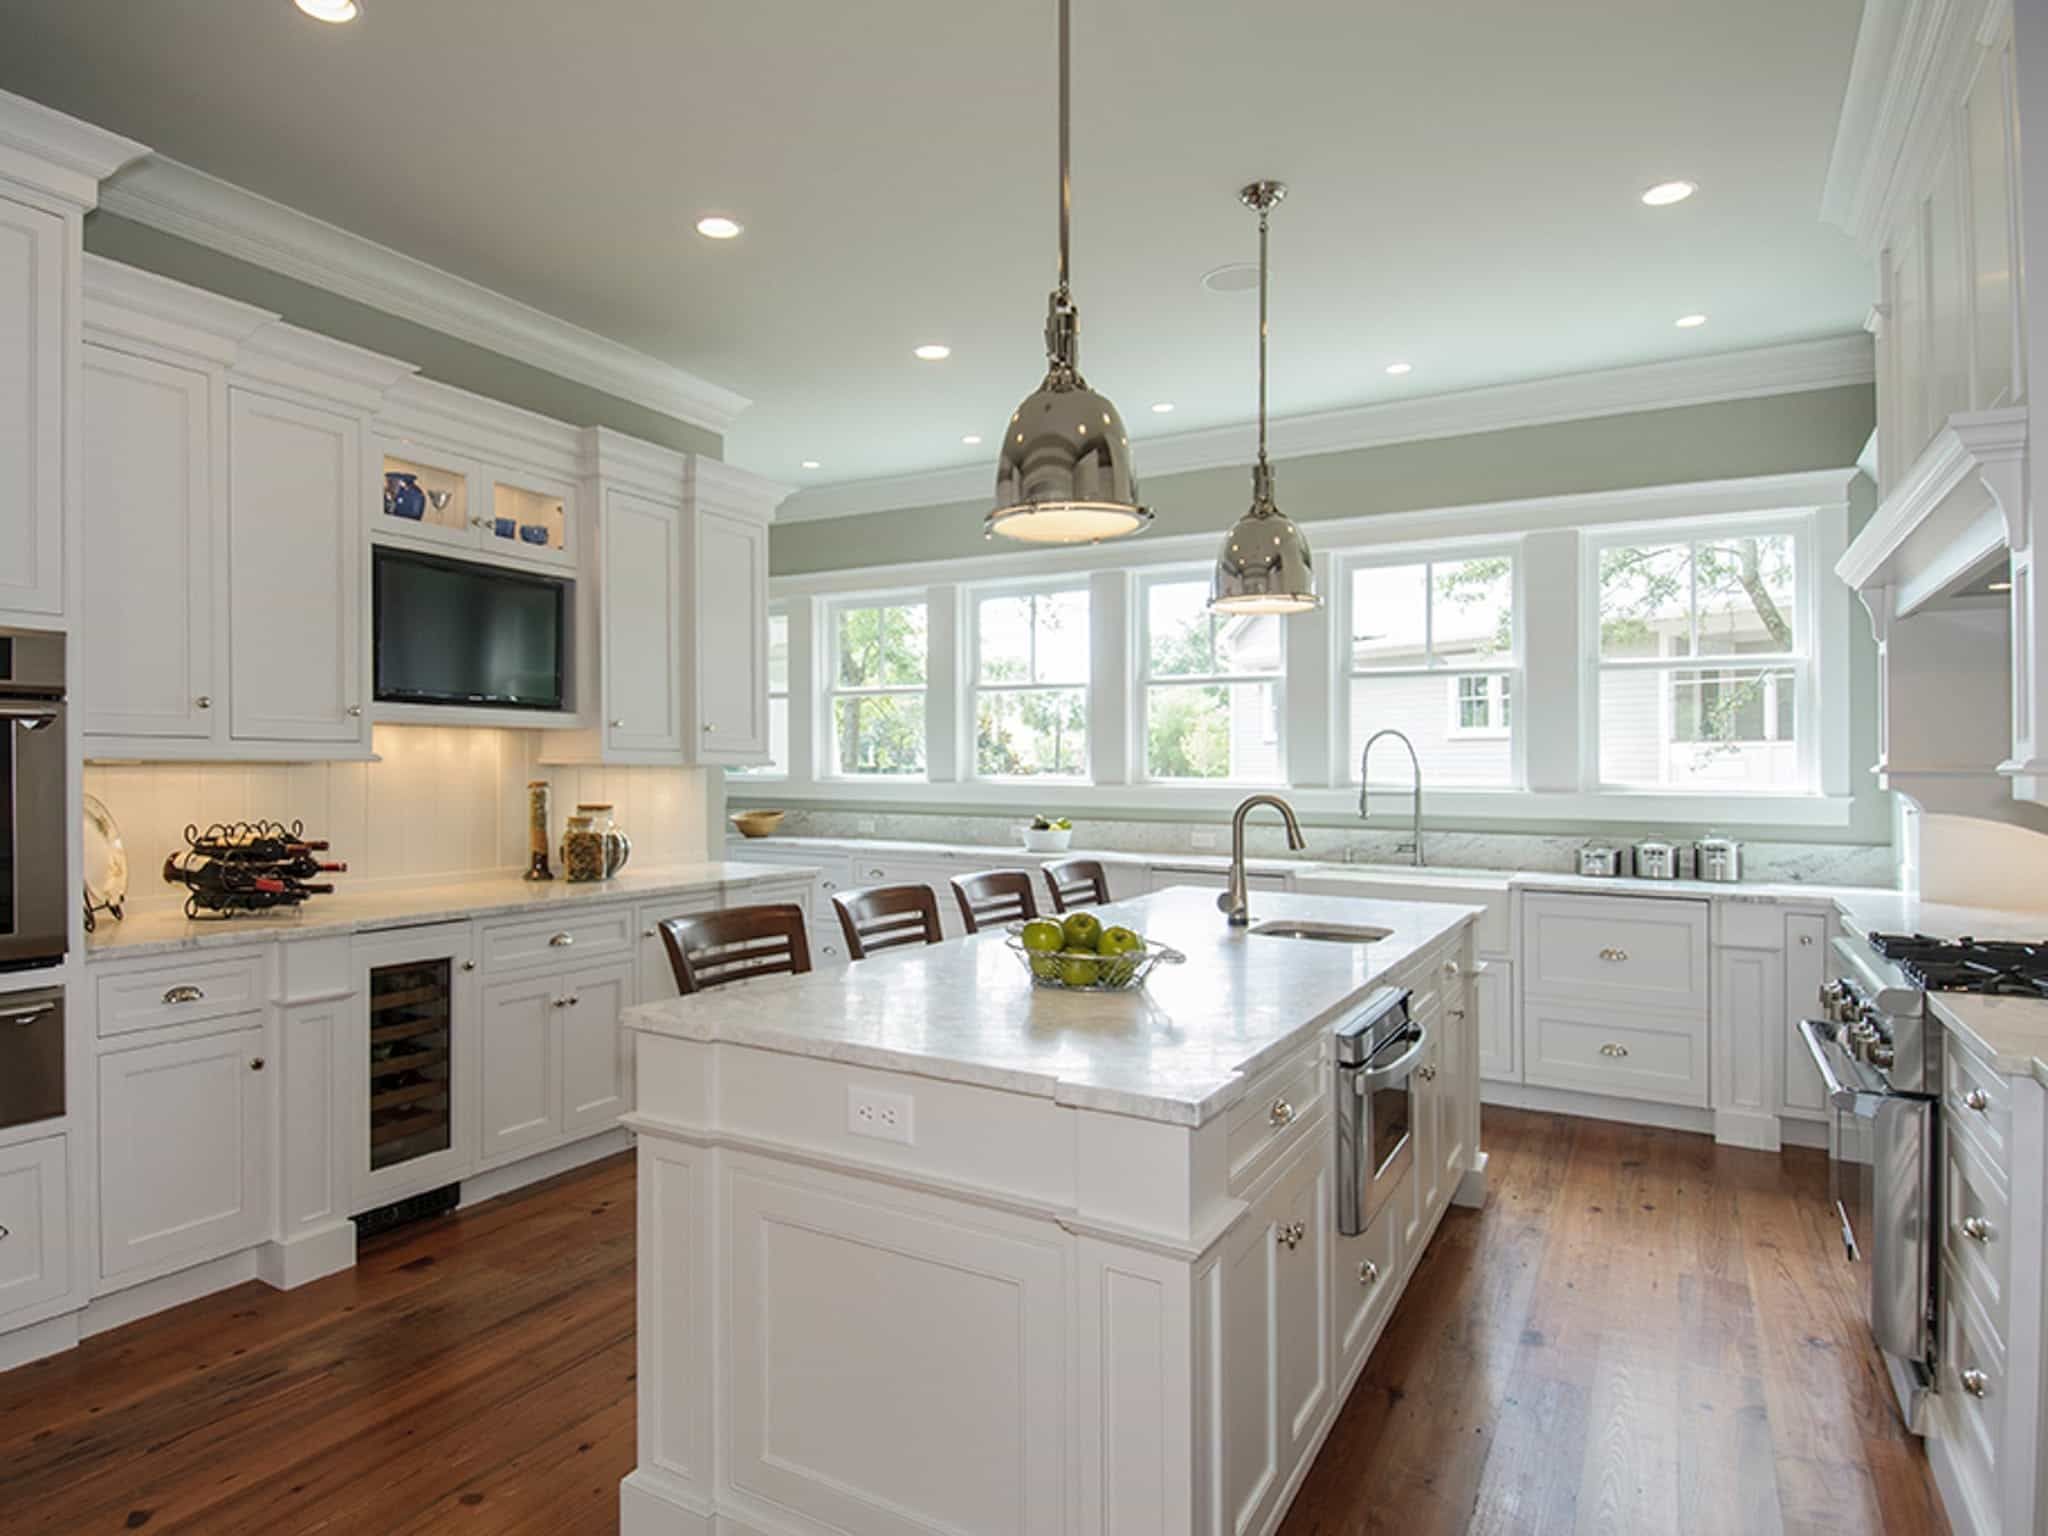 White Cottage Kitchen With Classic Functional Cabinets Design (View 16 of 26)